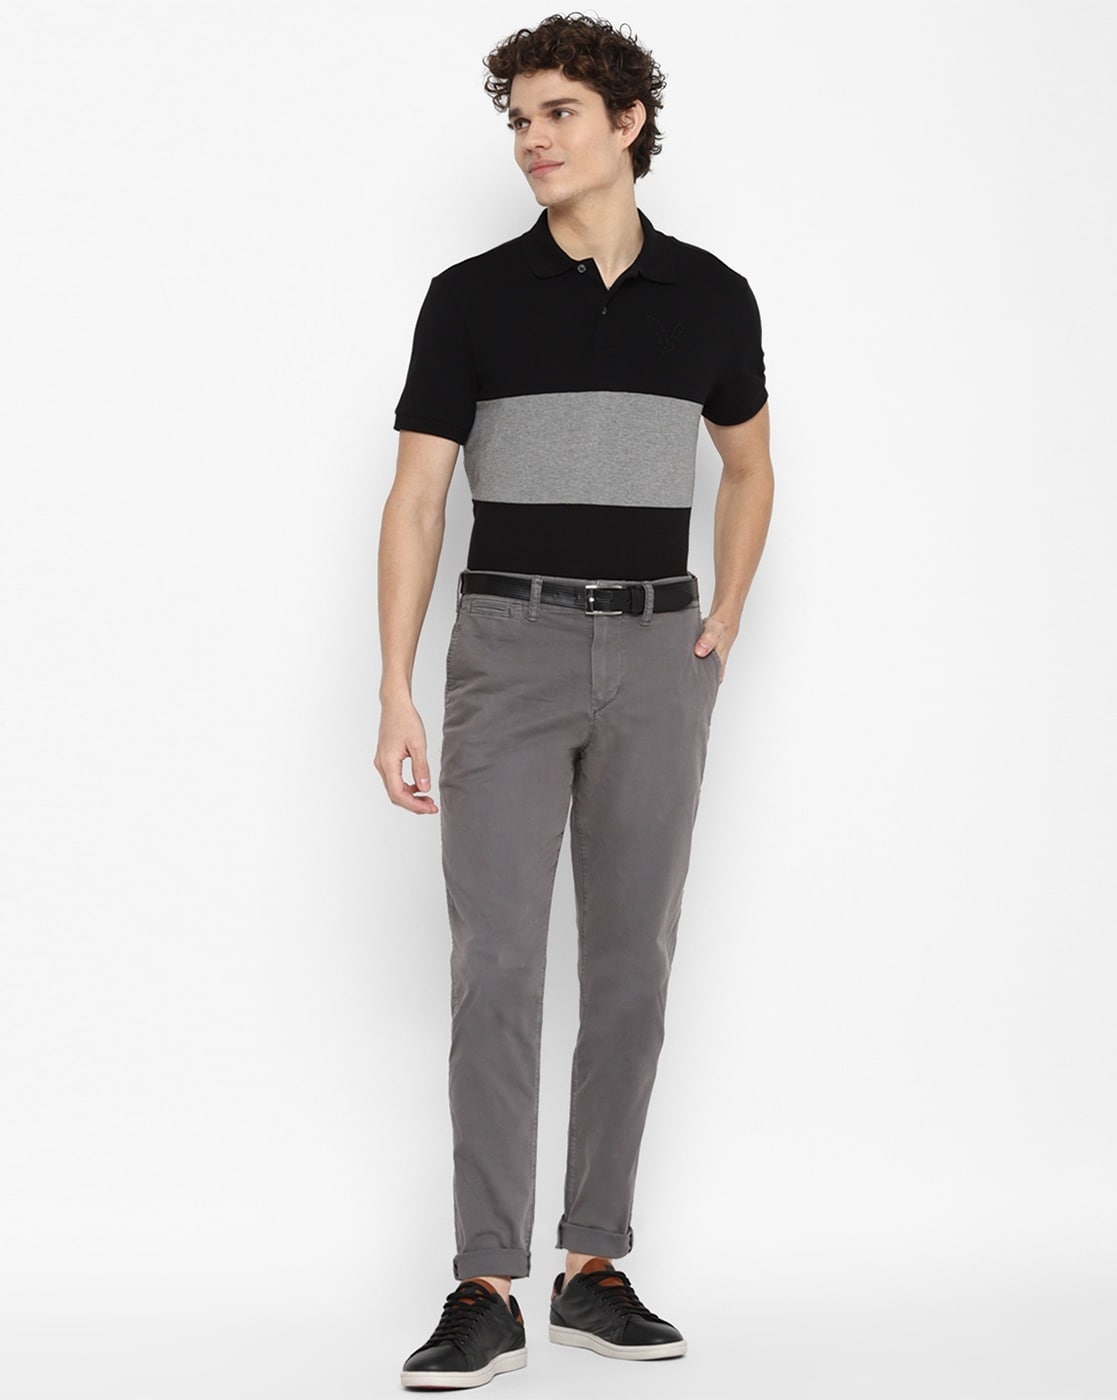 Uniqlo Singapore - Find T-shirts too casual? Opt for a polo shirt and pants  combo instead for casual Friday looks. MEN's Dry Pique Polo Shirt in Black,  $19.90 (U.P. $29.90) | Facebook